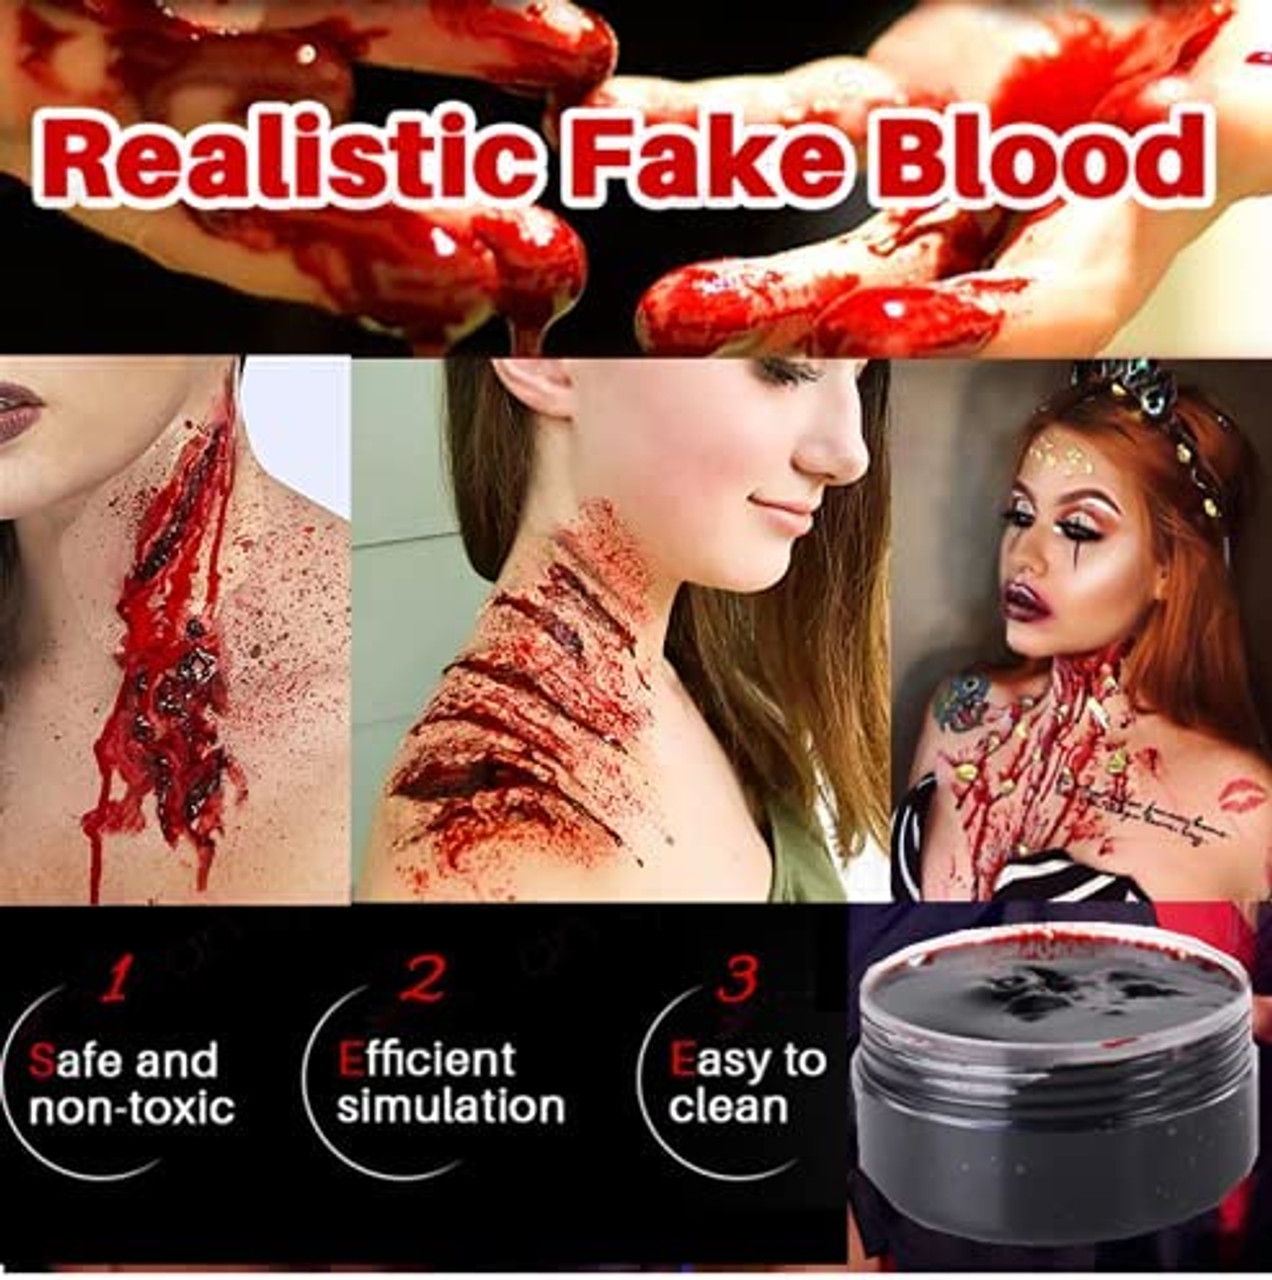 Mysense Scar Wax Kit SFX Make Up Special Effects Fake Molding Wound Skin  Wax Body Paint Halloween Set Fake Nose Stage Zombie Cosplay Costume SFX